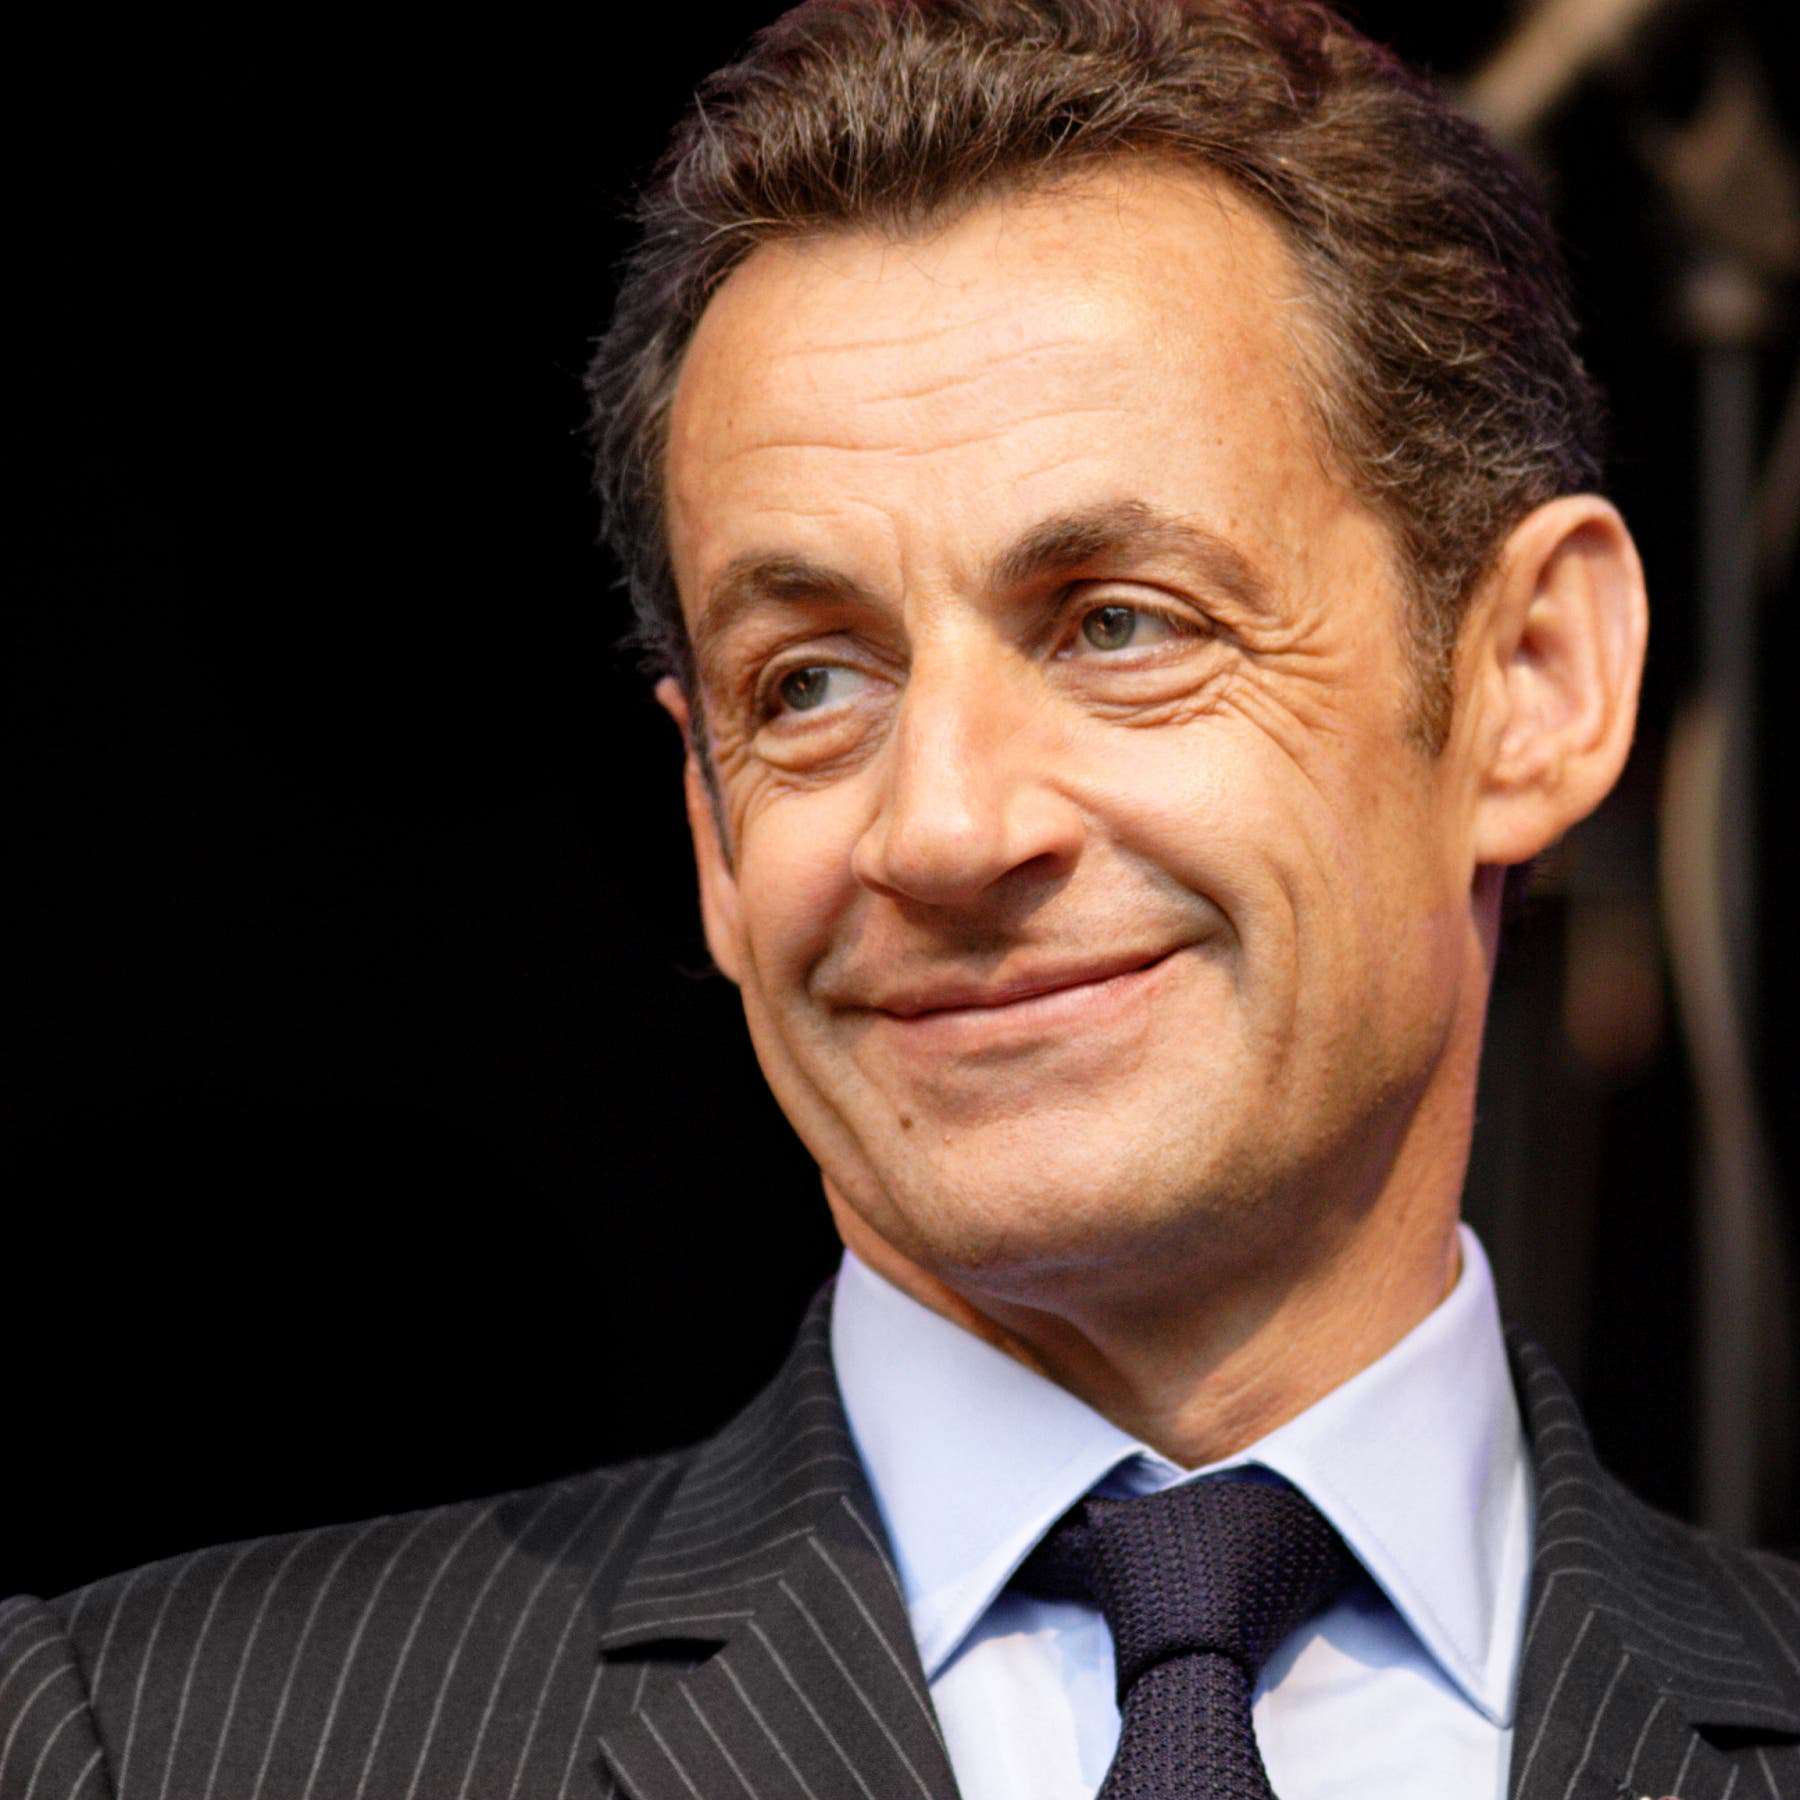 Nicolas Sarkozy began his mandate of President of the Republic of France on 16 May 2007 and ended it in 2012. He wants to become the president of France once more. Photo by Aleph.